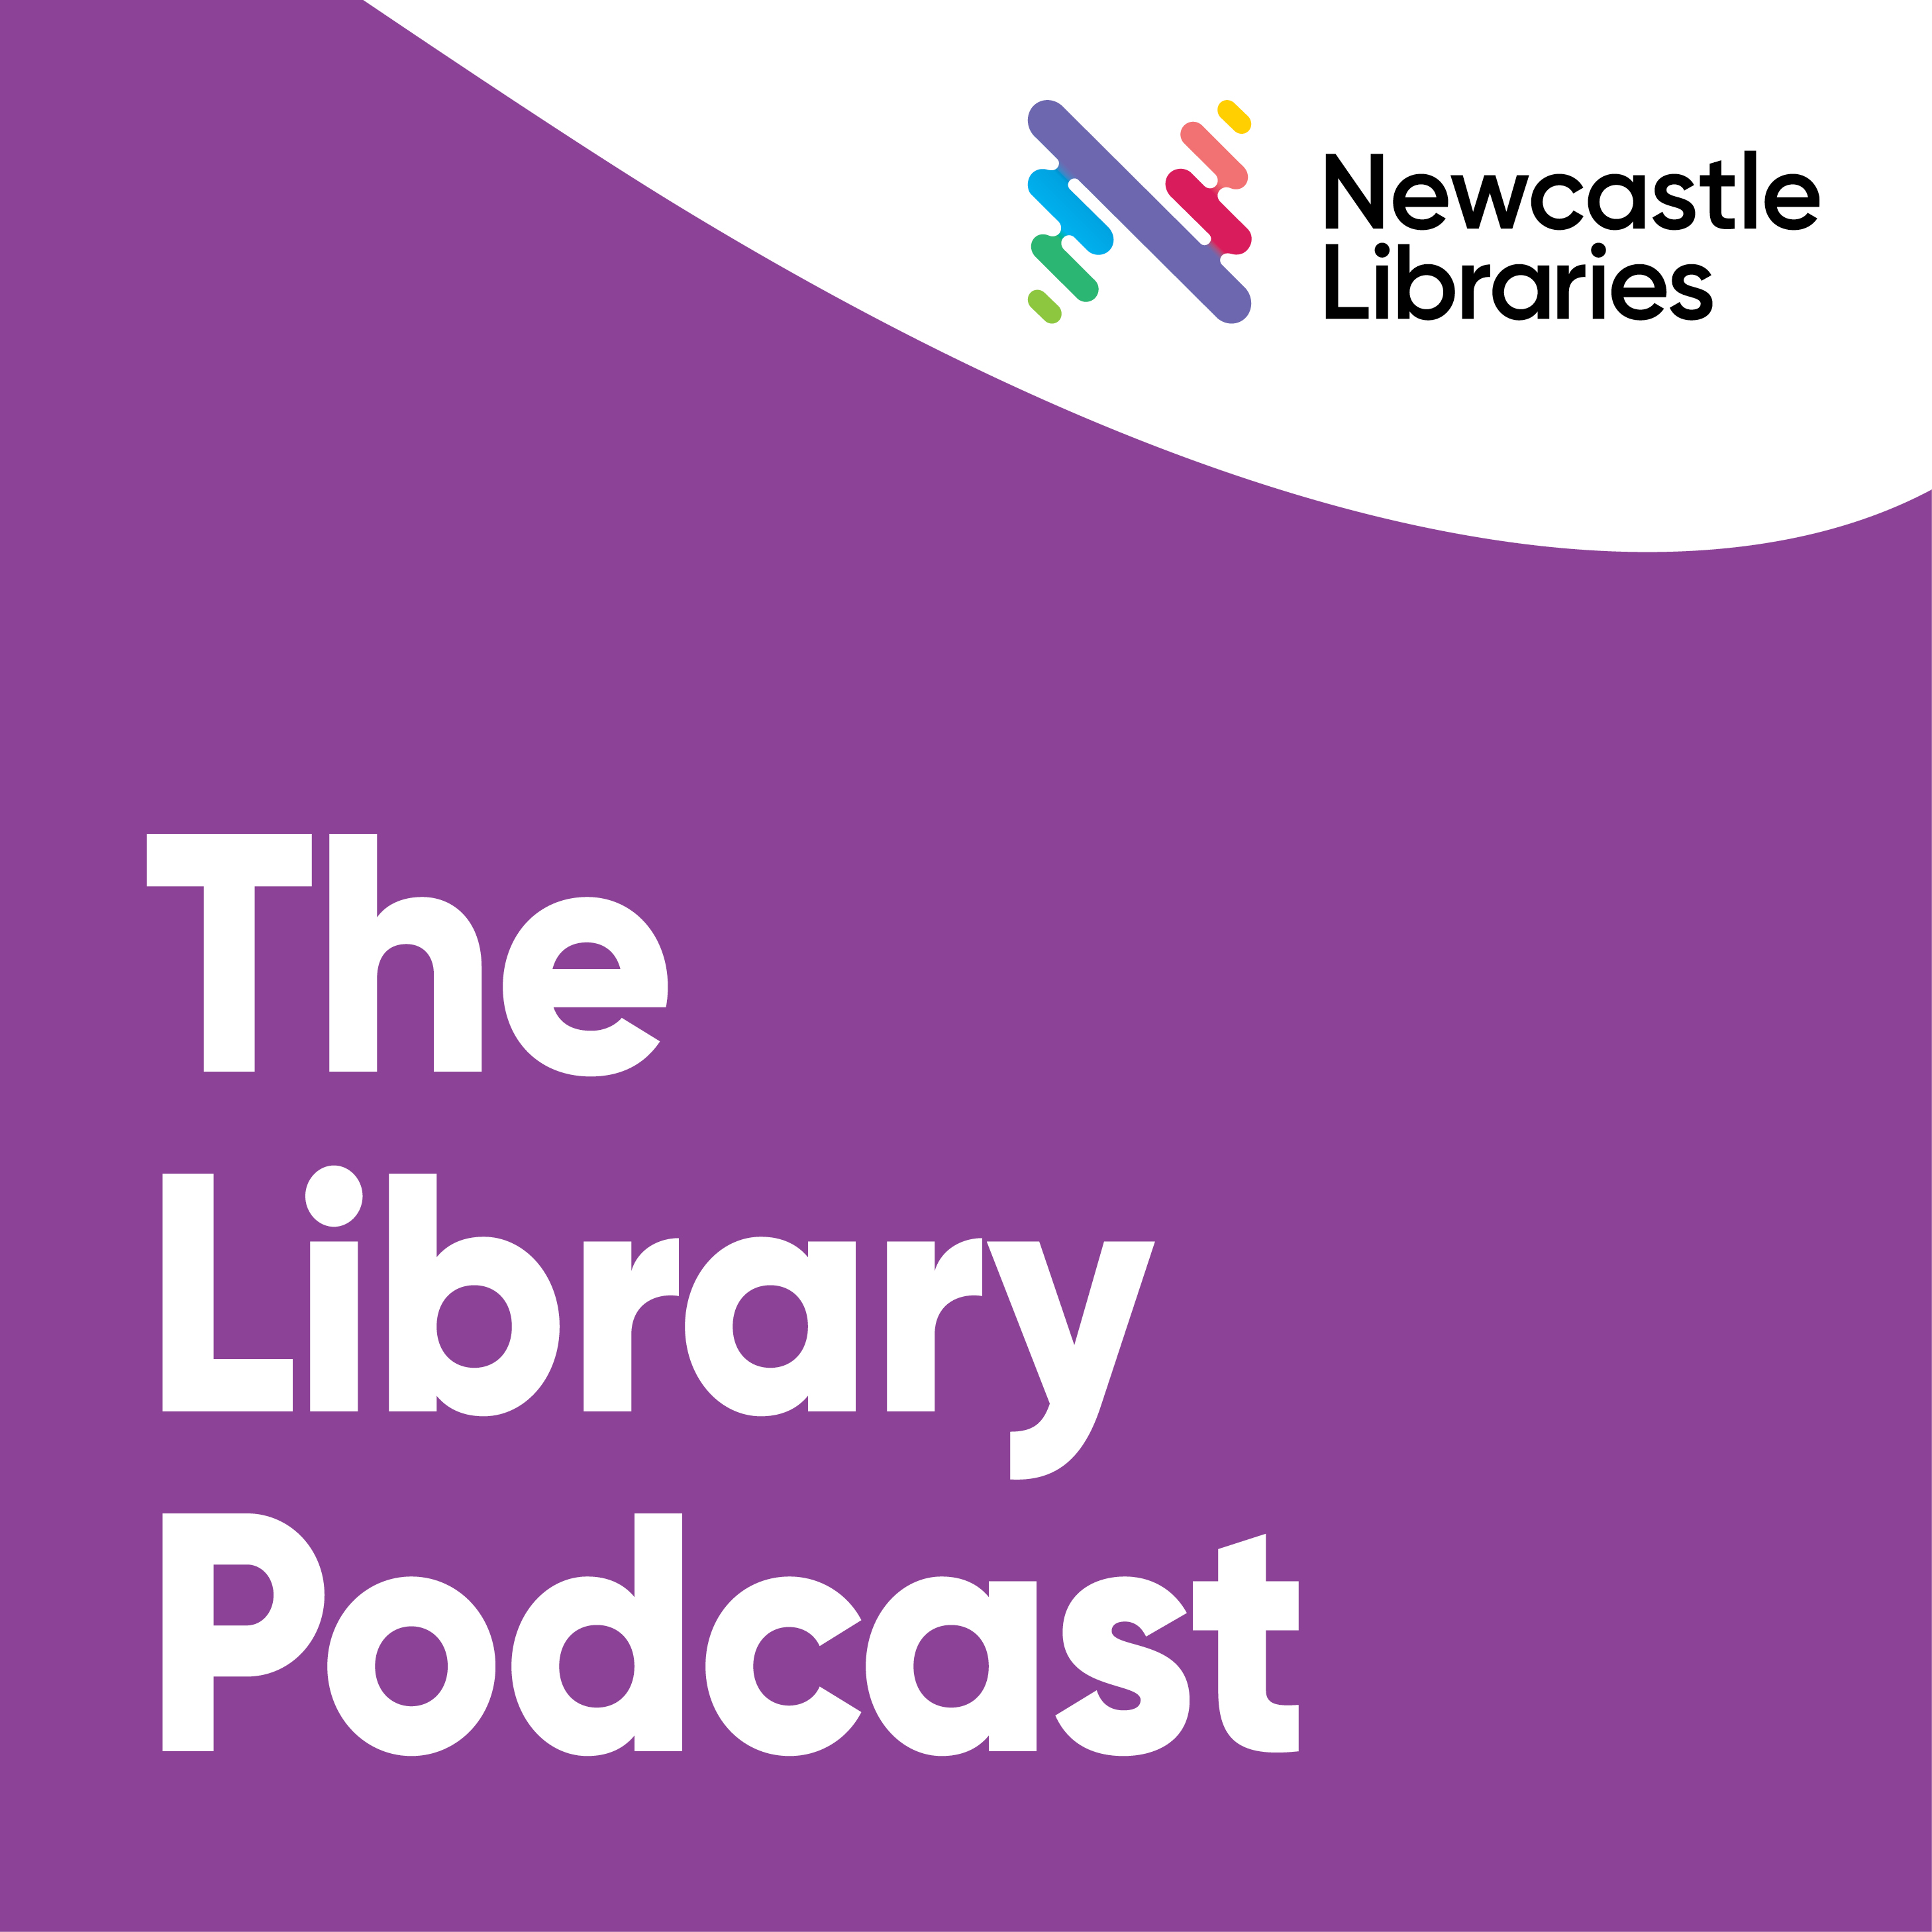 CHATS with Notable Newcastle Authors - Dr Wendy James